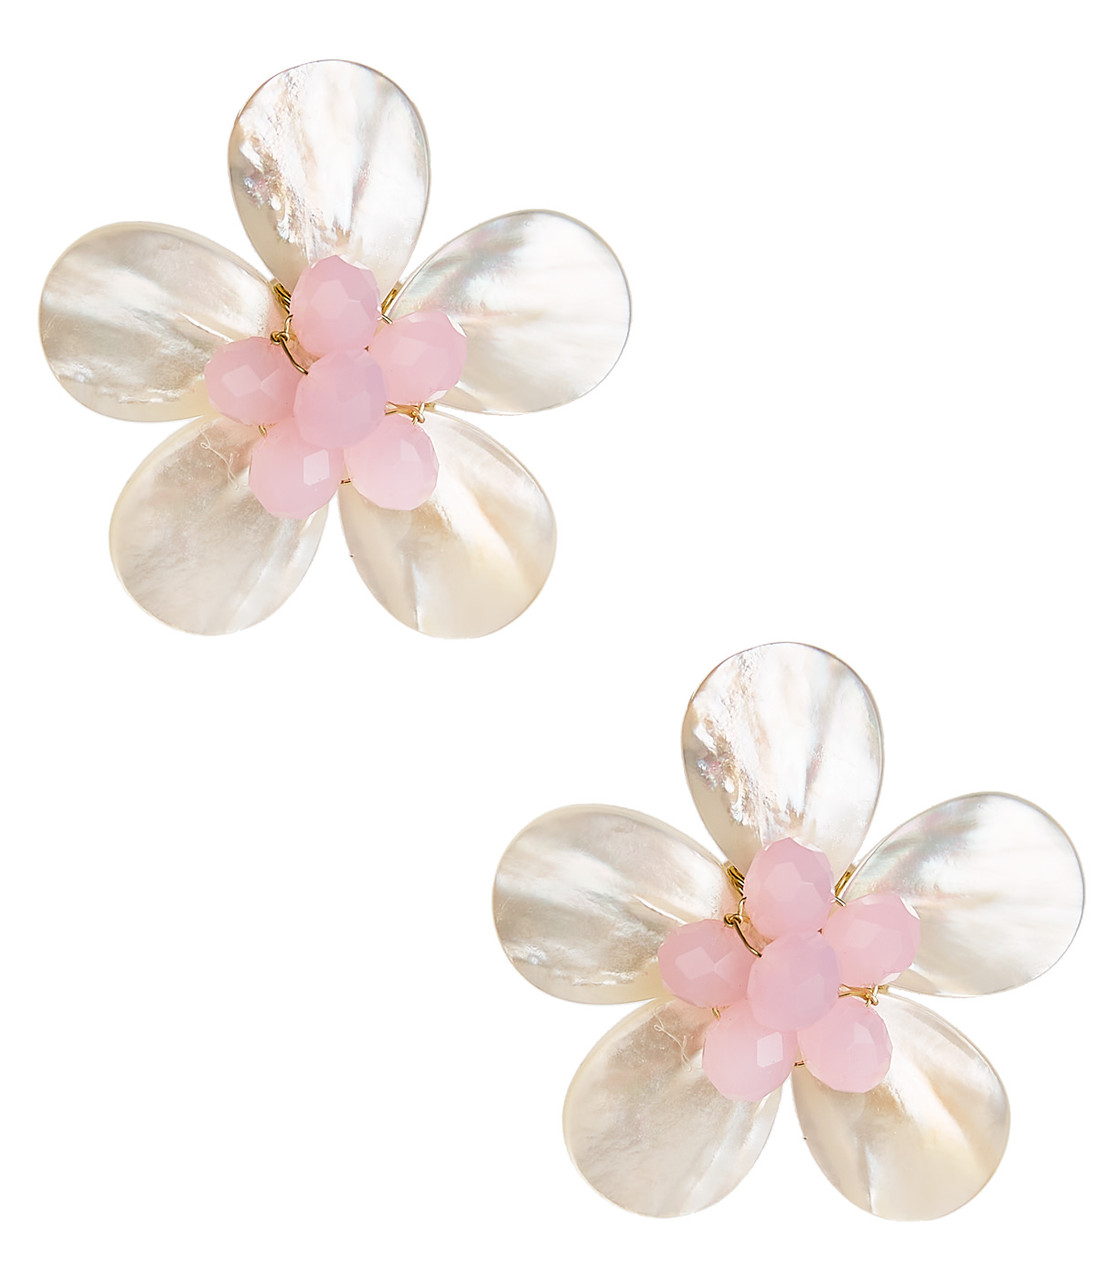 Color Blossom Star Ear Stud, Pink Gold And White Mother-Of-Pearl